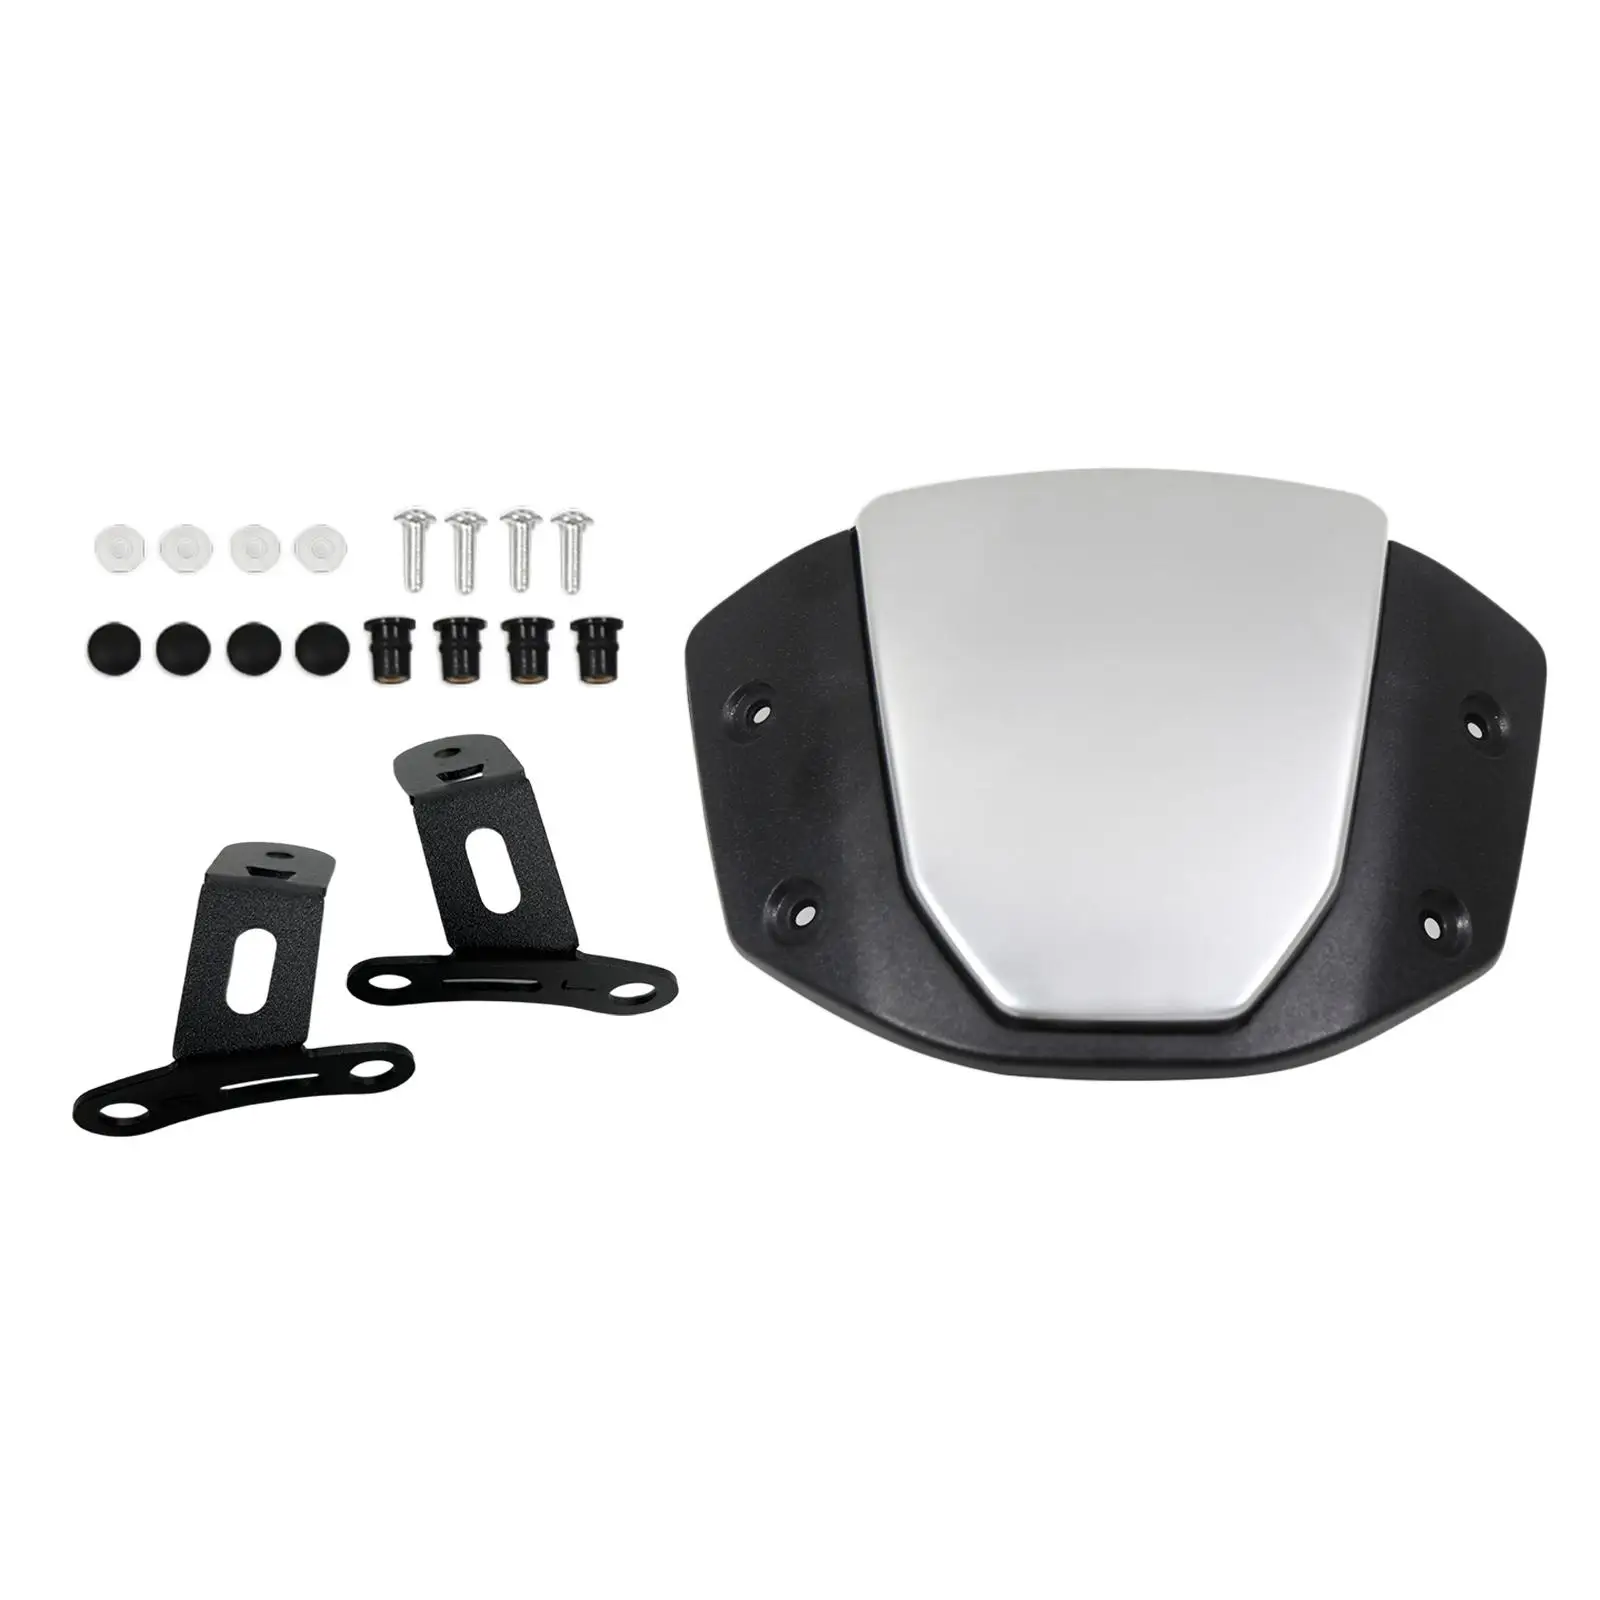 Front Screen Windshield Windscreen Protector for CB650R Replaces